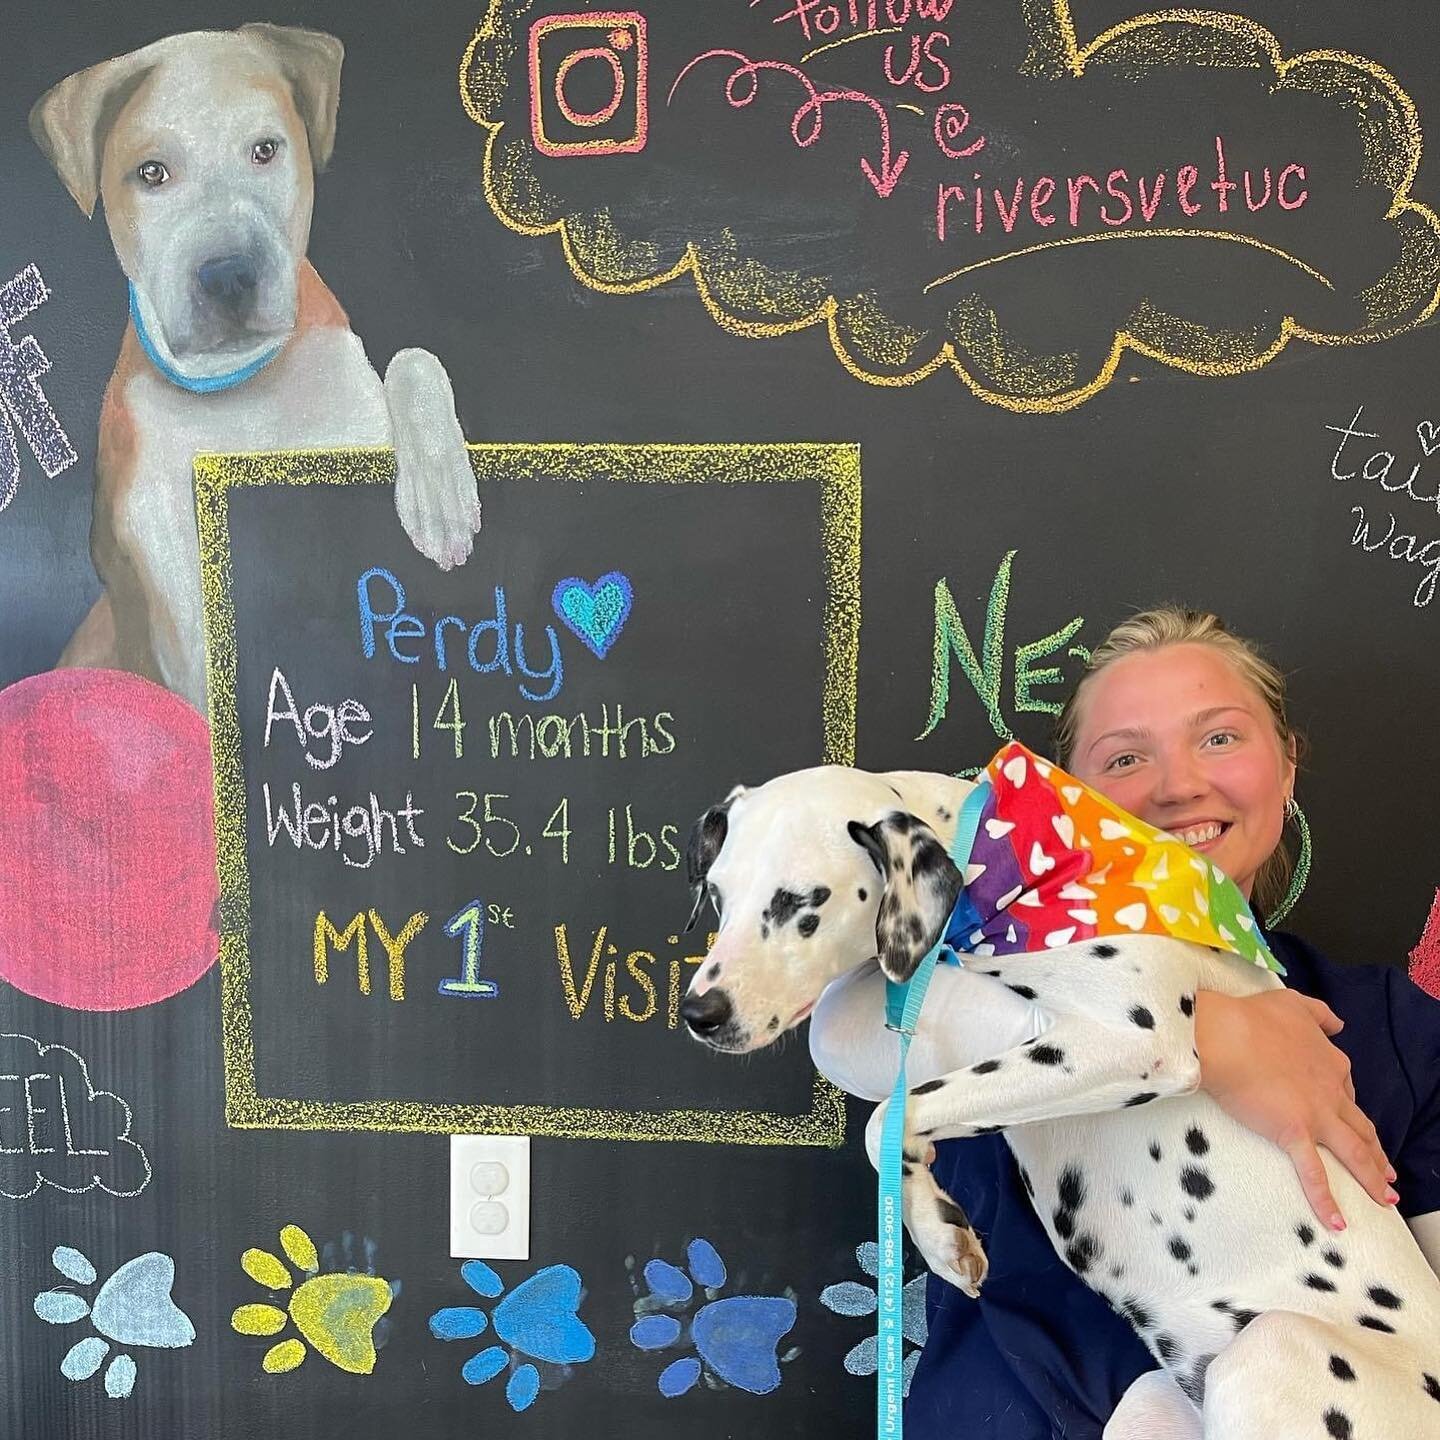 Find you a vet that loves your pet as much as you do 🥰🥰 

#riversvet #pittsburgh #veterinarian #dalmationsofinstagram #dalmatian #deafdogsofinstagram #rvuc #firstvetvisit